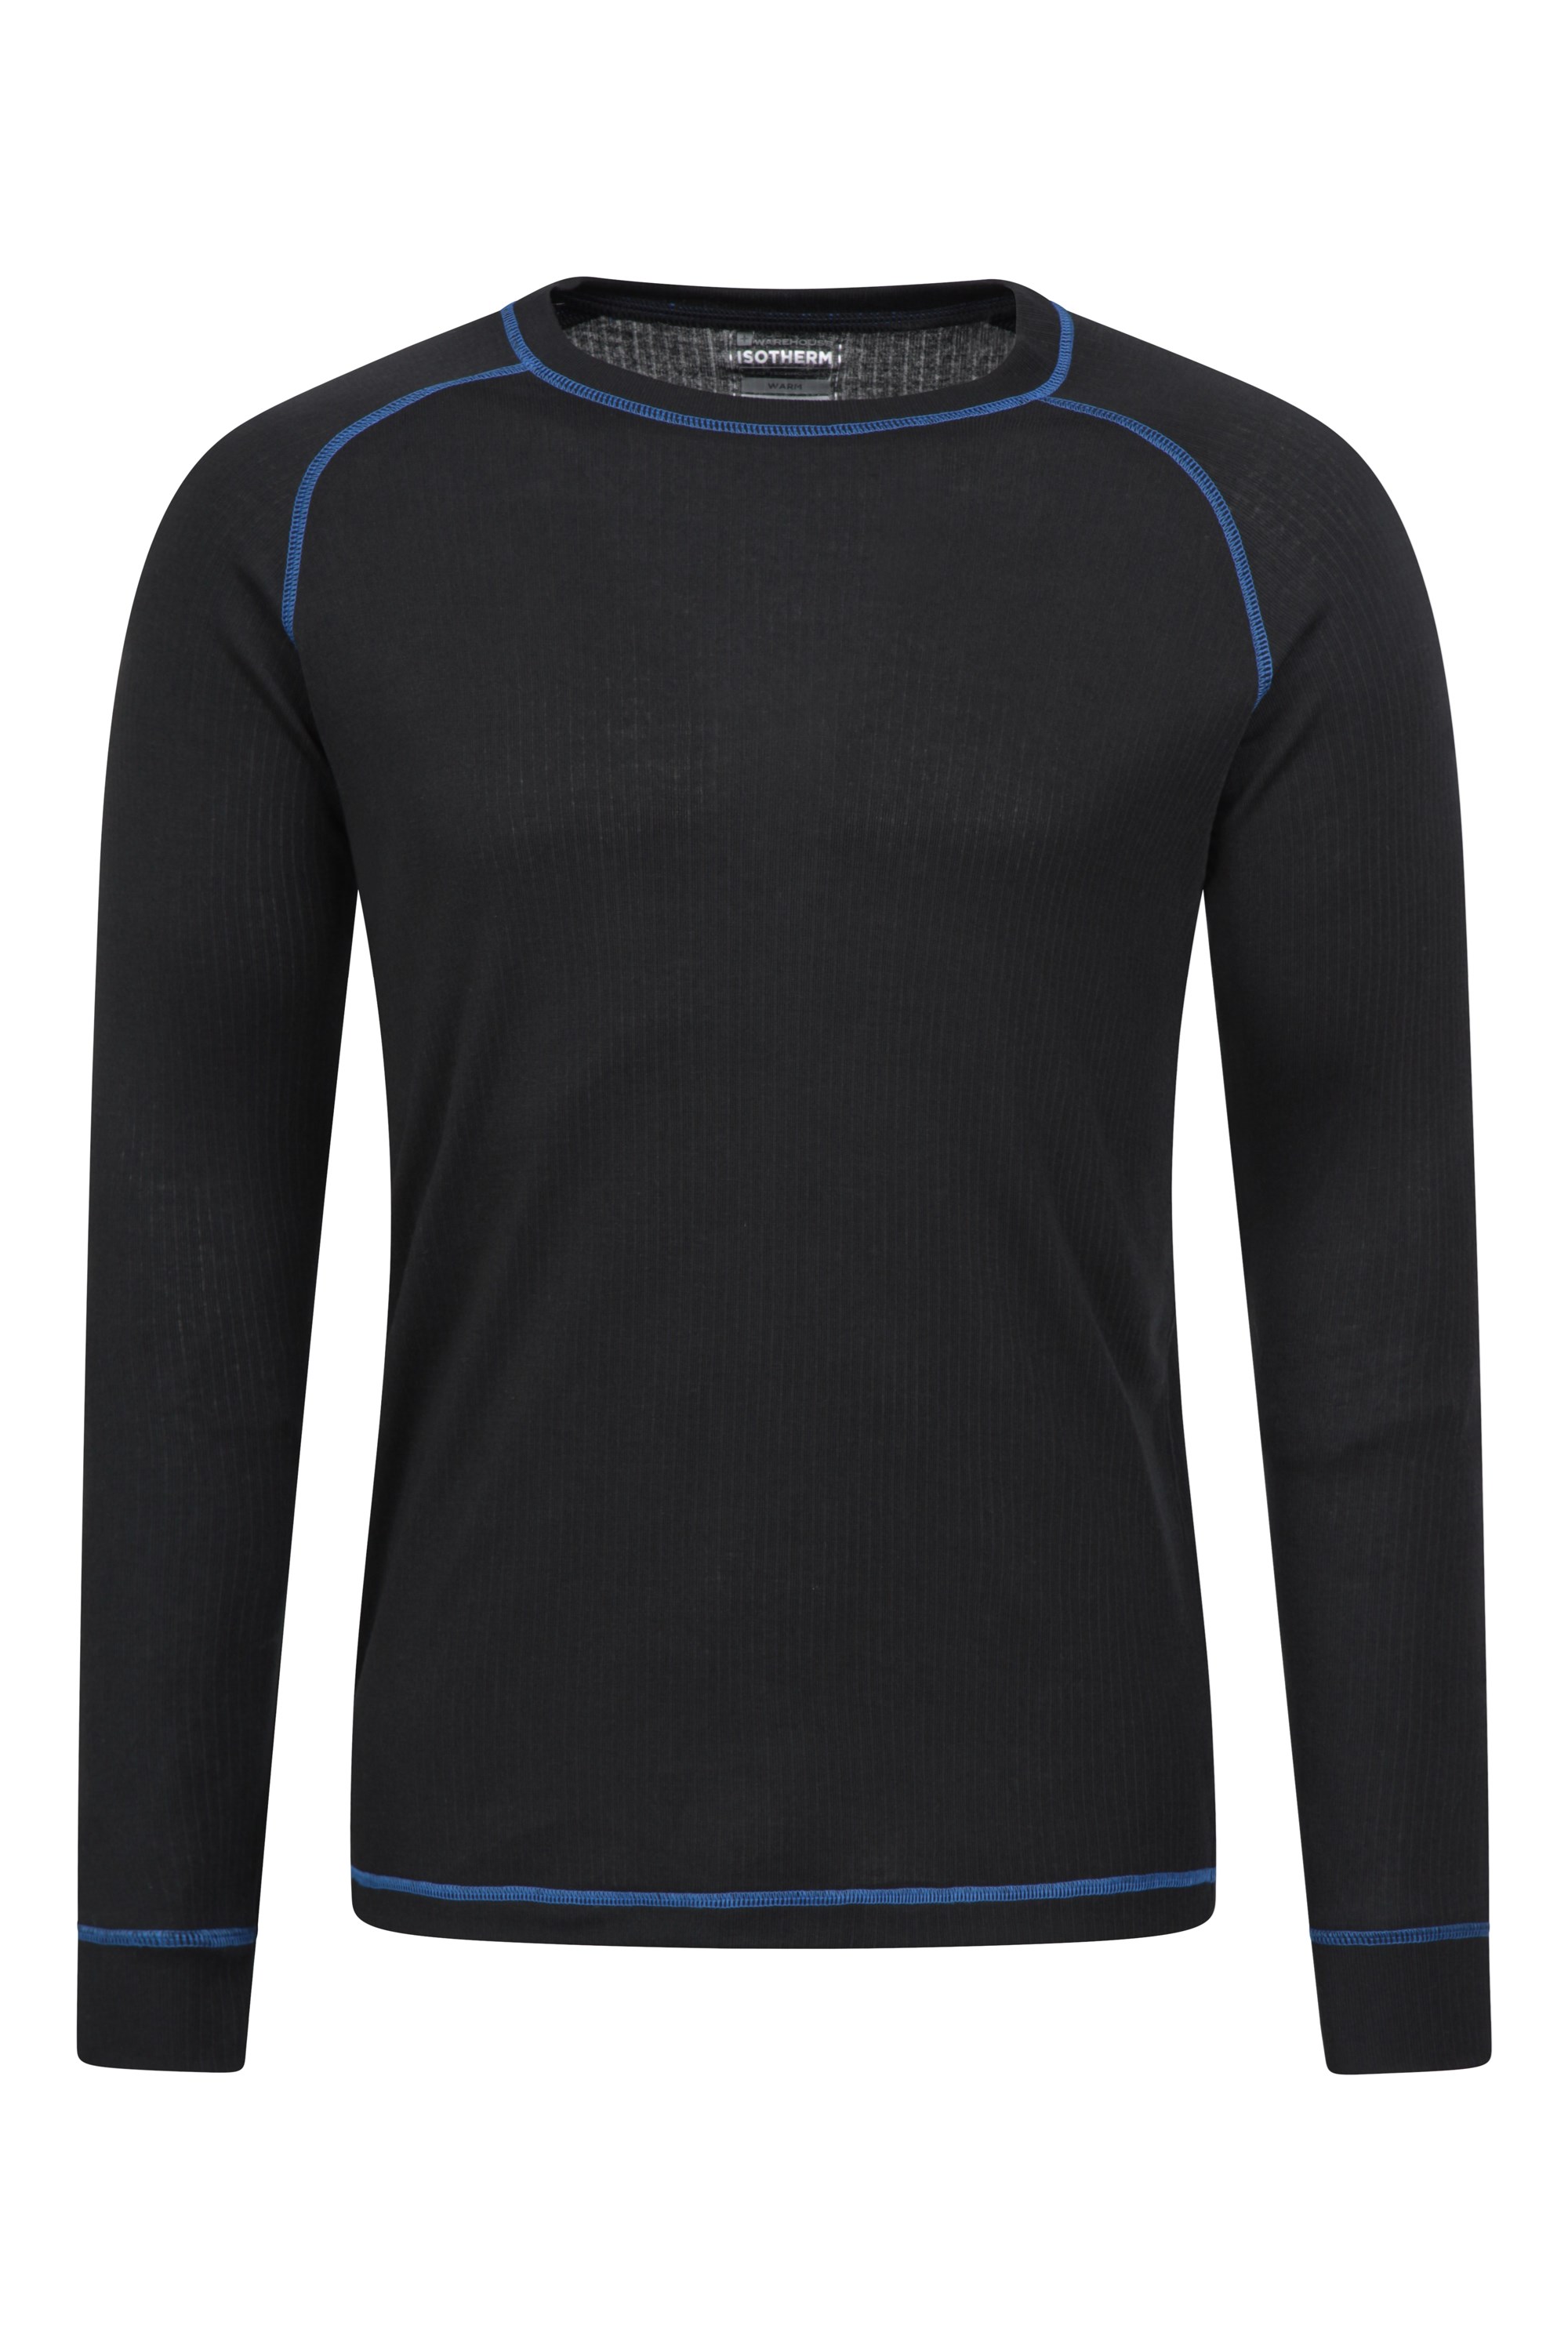 Short Sleeve Round Neck Mountain Warehouse Talus Mens Thermal Baselayer Tee 